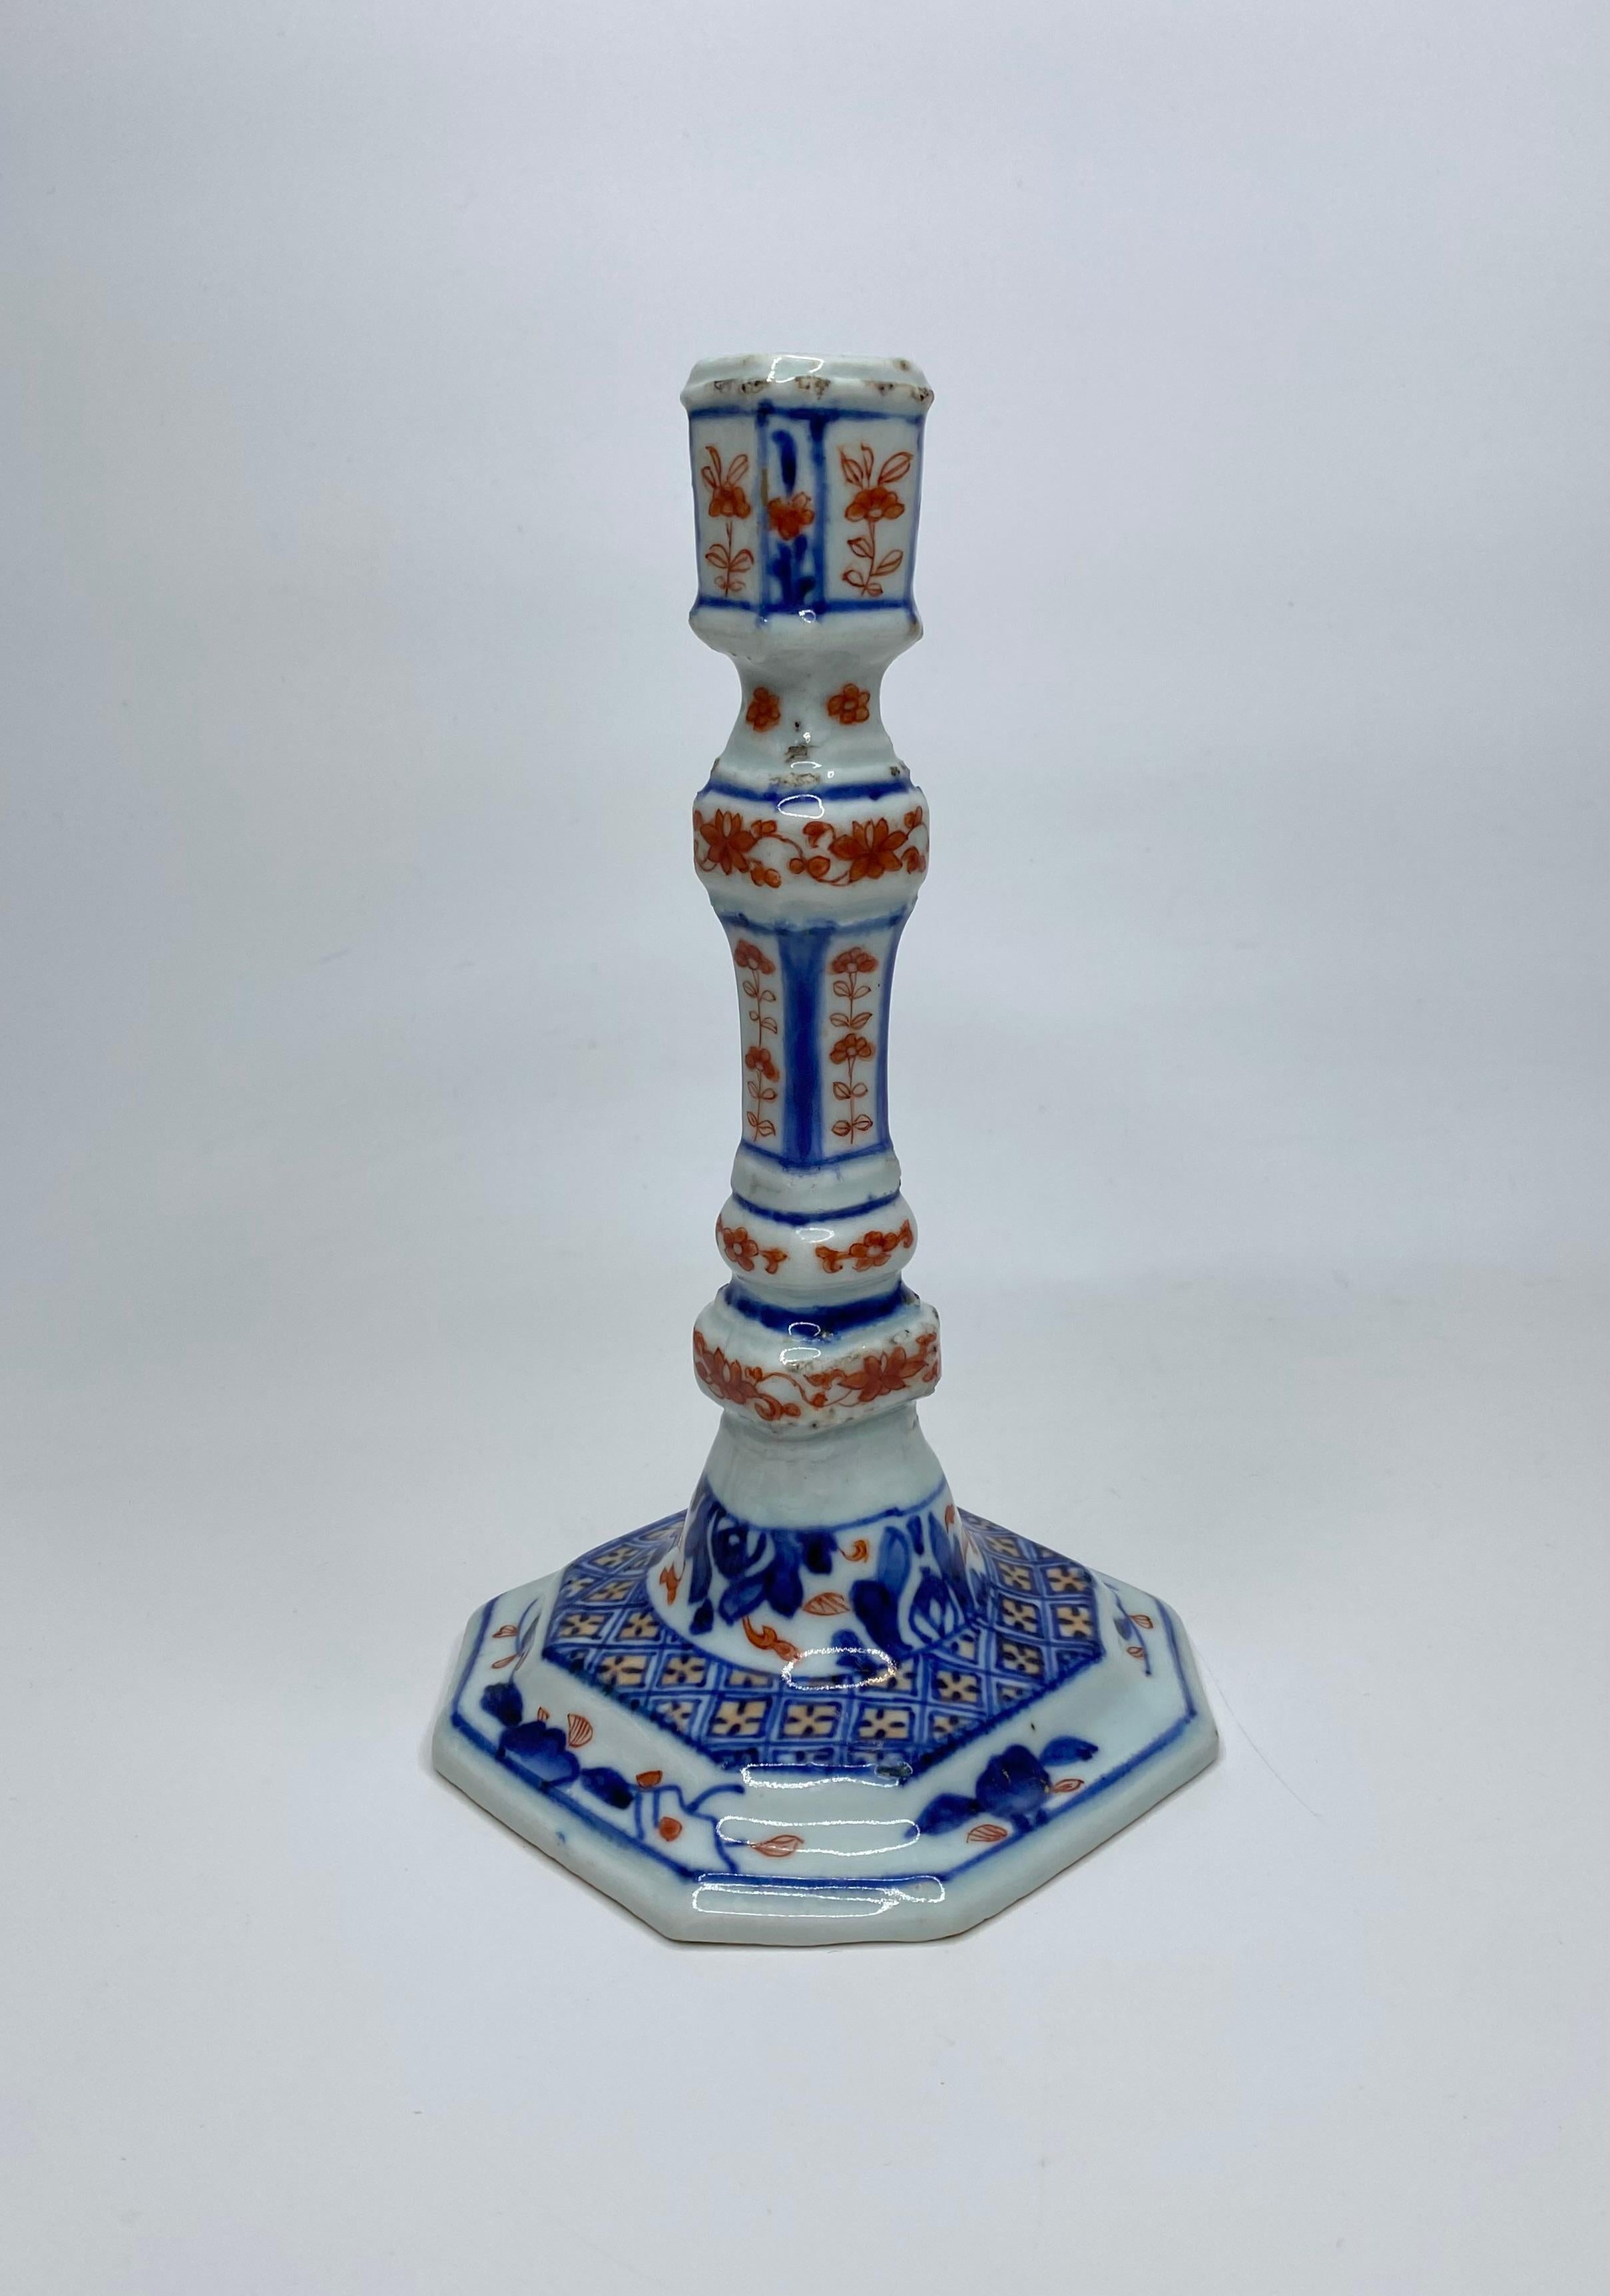 Pair of Chinese ‘Imari’ porcelain candlesticks, c. 1720, Kangxi Period. Modelled after a European silver or brass original, both candlesticks rise from a squared, and stepped, octagonal base, terminating in square sconces. Hand painted in the